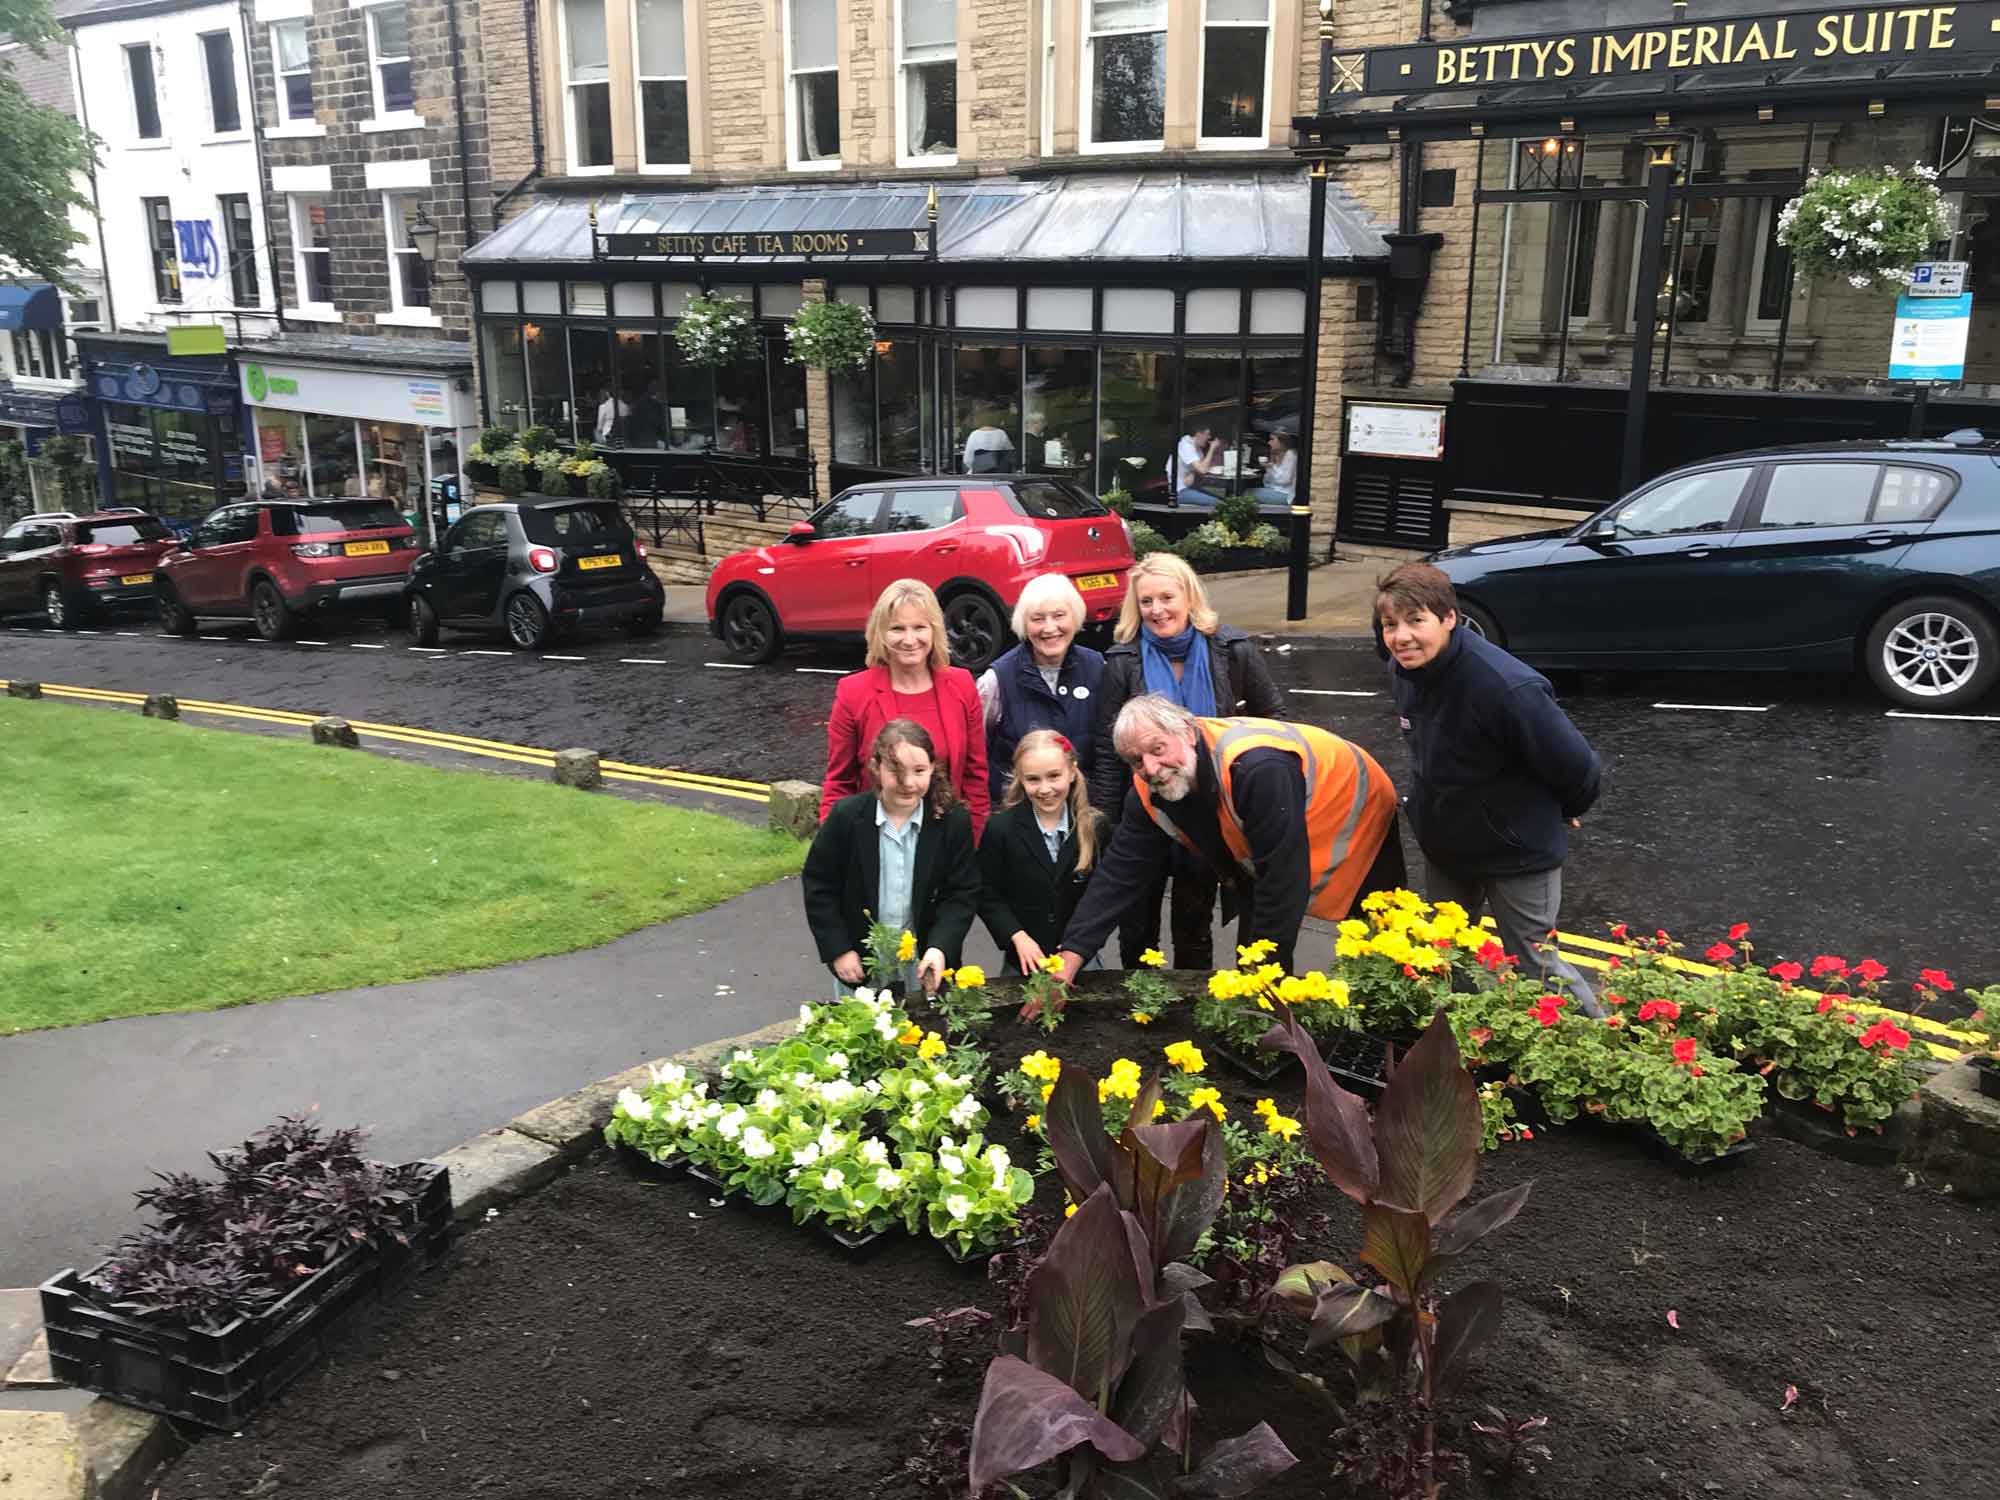 pictured is Head Teacher Nicola Matthews, Horticultural Officer Sue Wood and Gardener Richard Gilbert along with Pam Grant, President of Harrogate in Bloom and Fiona Fisk of competition sponsor Harrogate Flower Shows